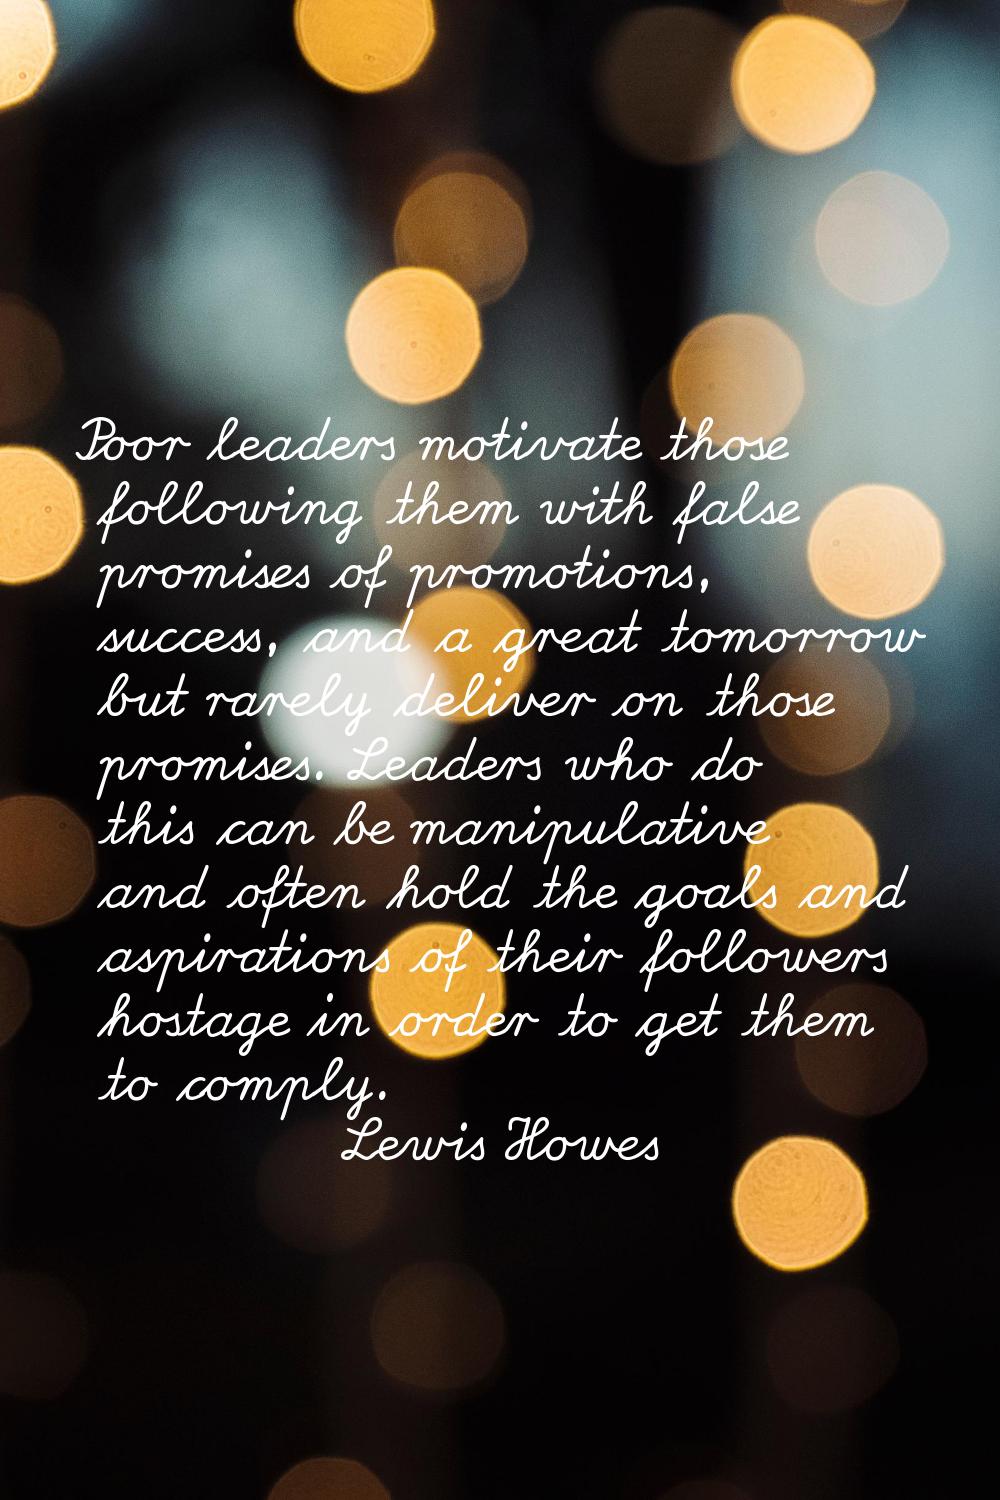 Poor leaders motivate those following them with false promises of promotions, success, and a great 